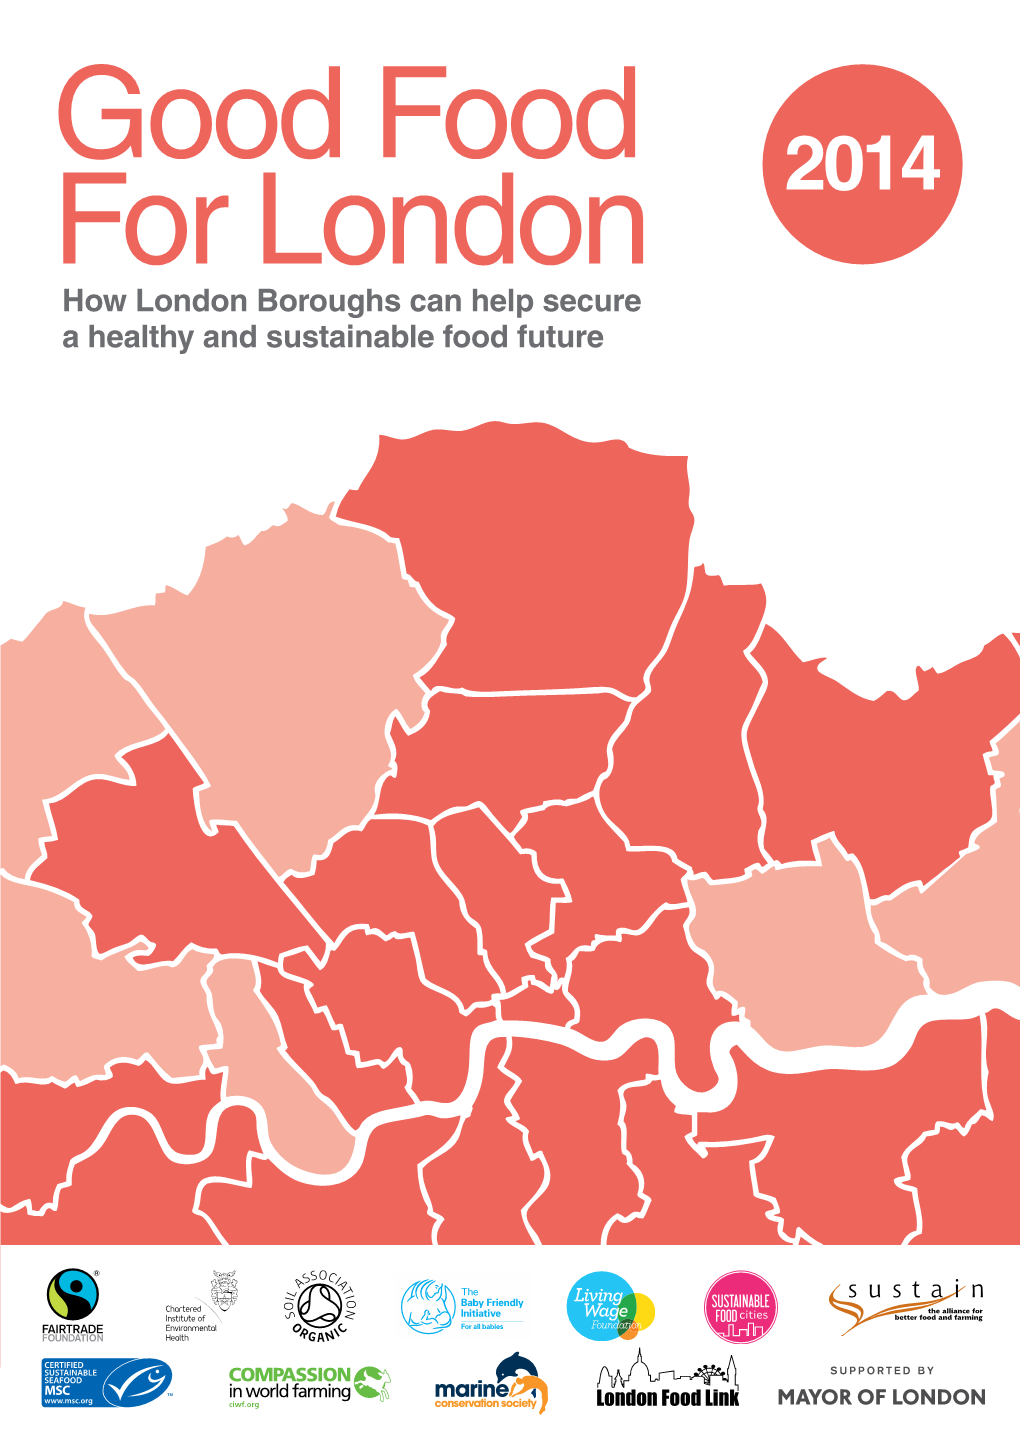 How London Boroughs Can Help Secure a Healthy and Sustainable Food Future 2